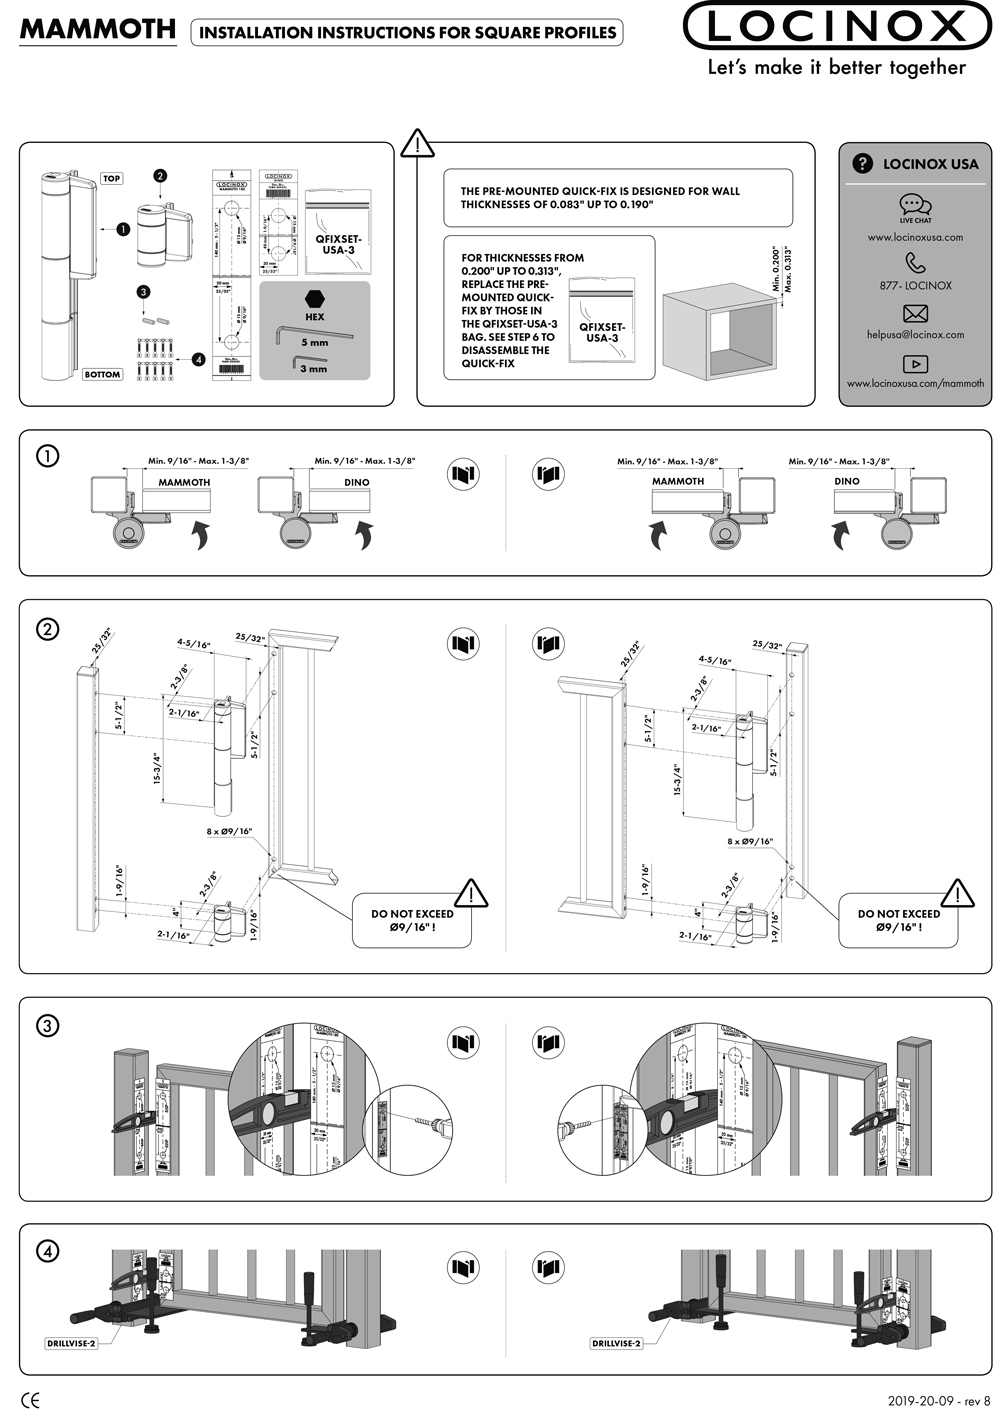 Installation Instructions for the Locinox Mammoth/Raptor Hydraulic Gate Closer/Hinges